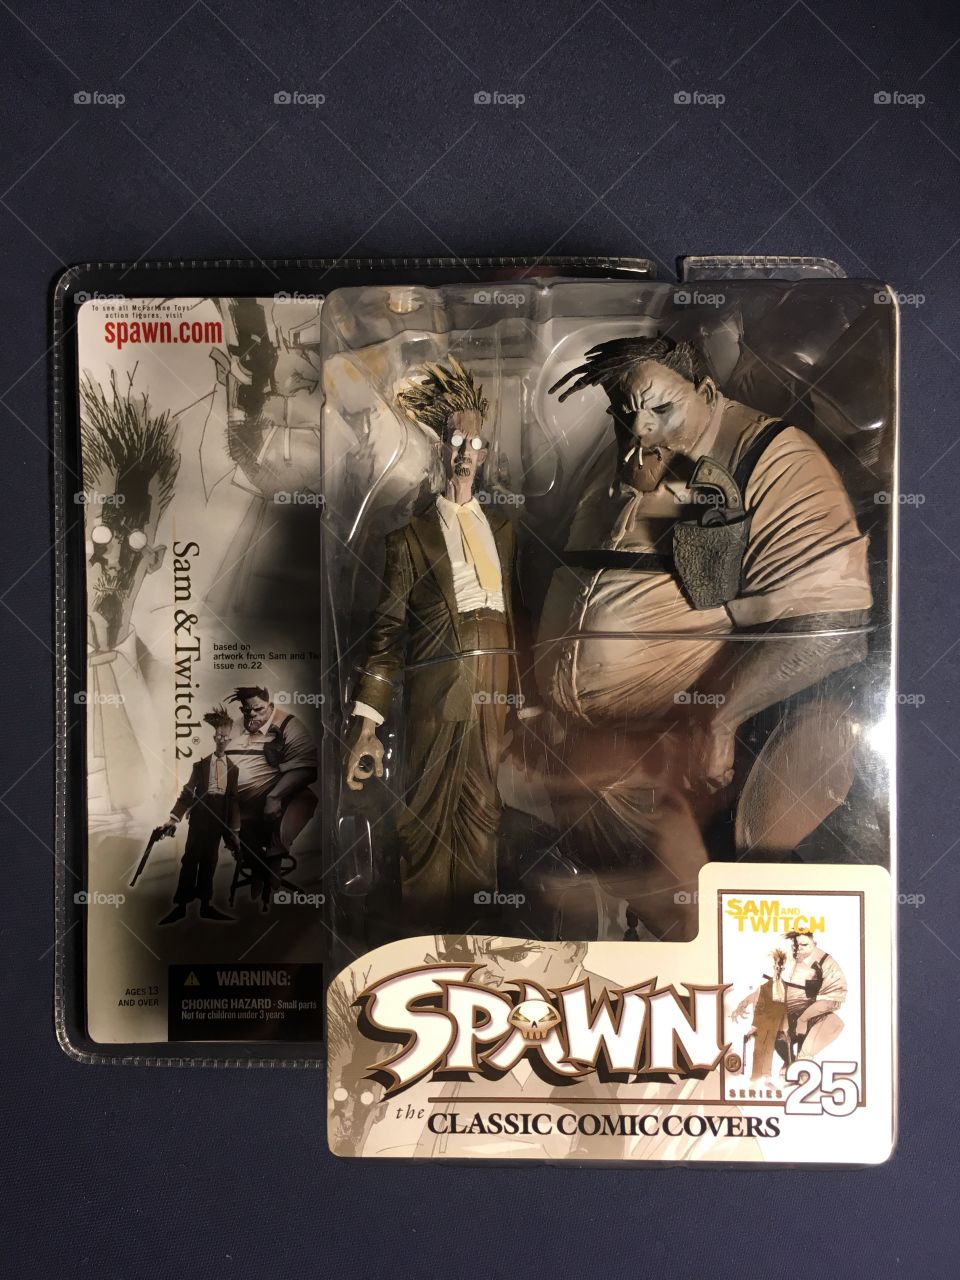 Sam &Twitch 2 - Spawn Classic Comic Covers Series 25 Action Figure 
Released - 2004